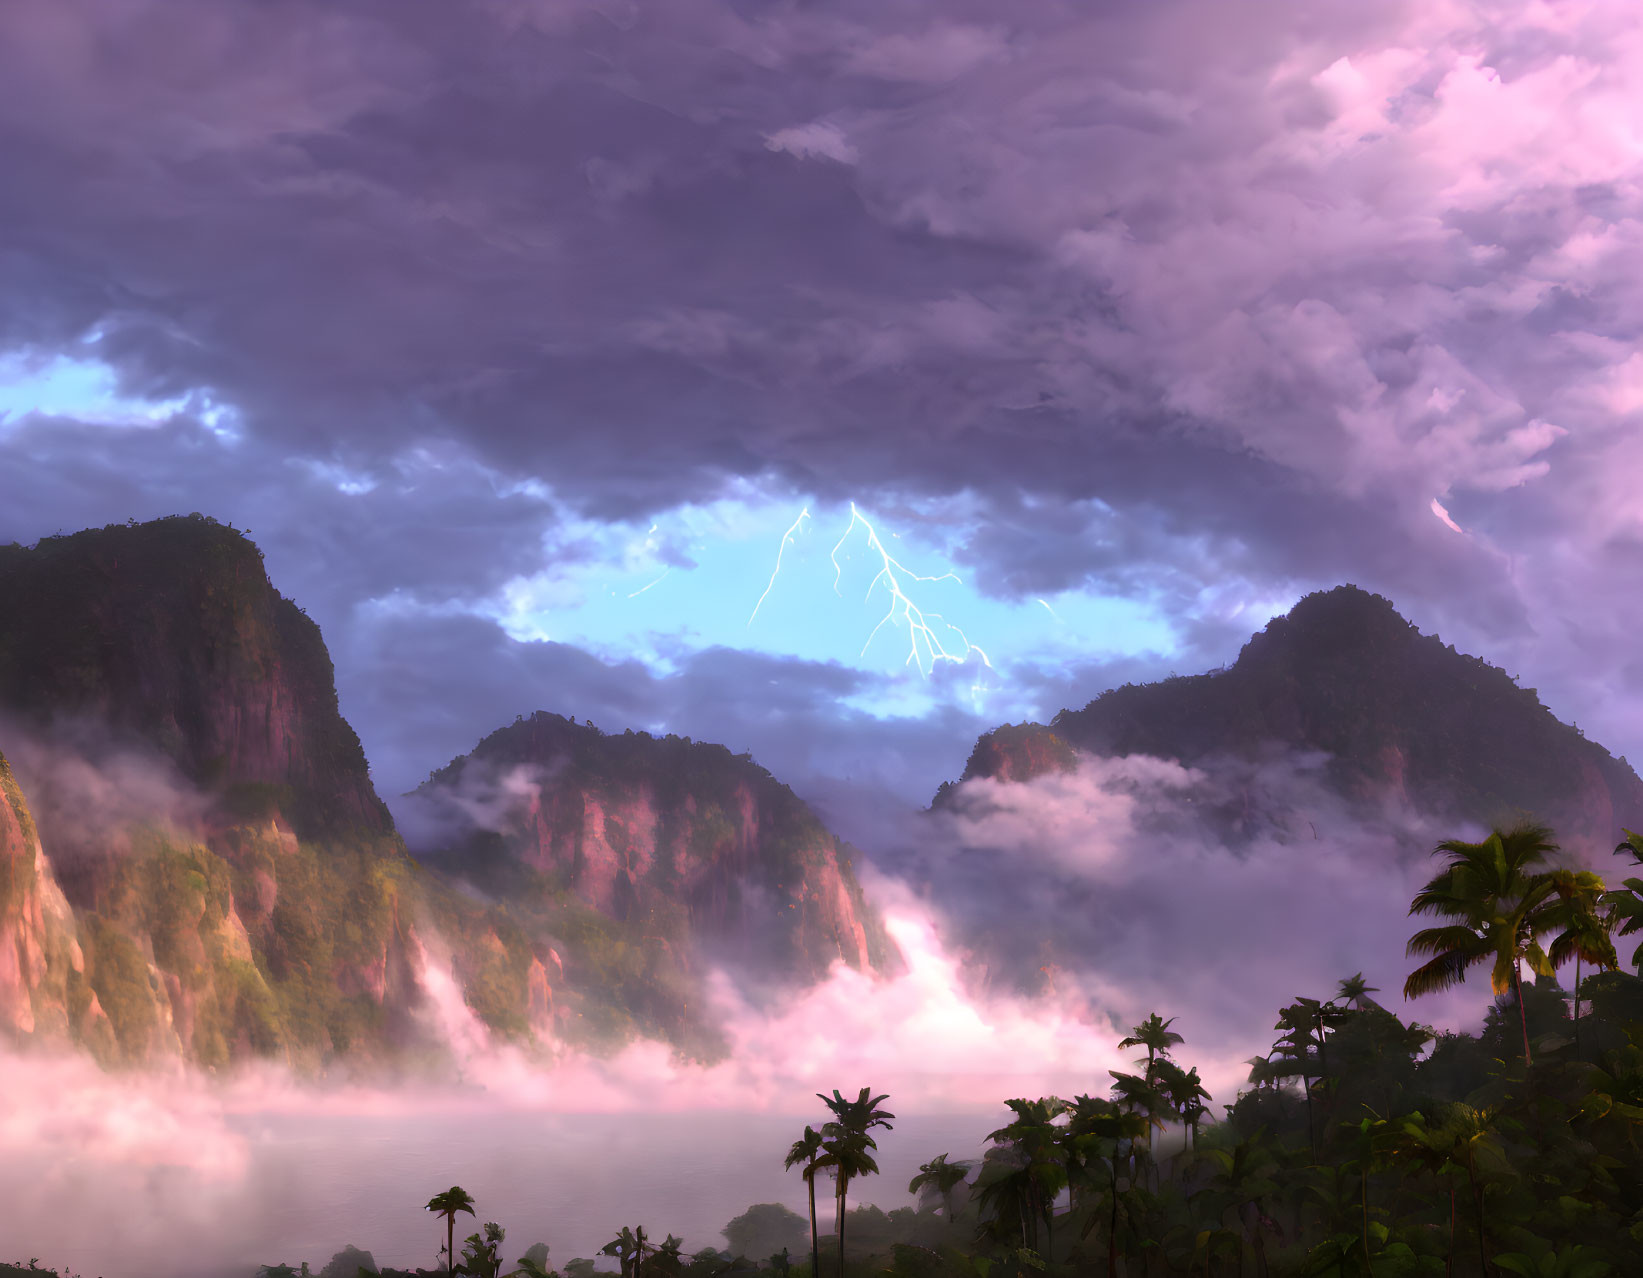 Majestic mountains in mist under a purple sky with lightning